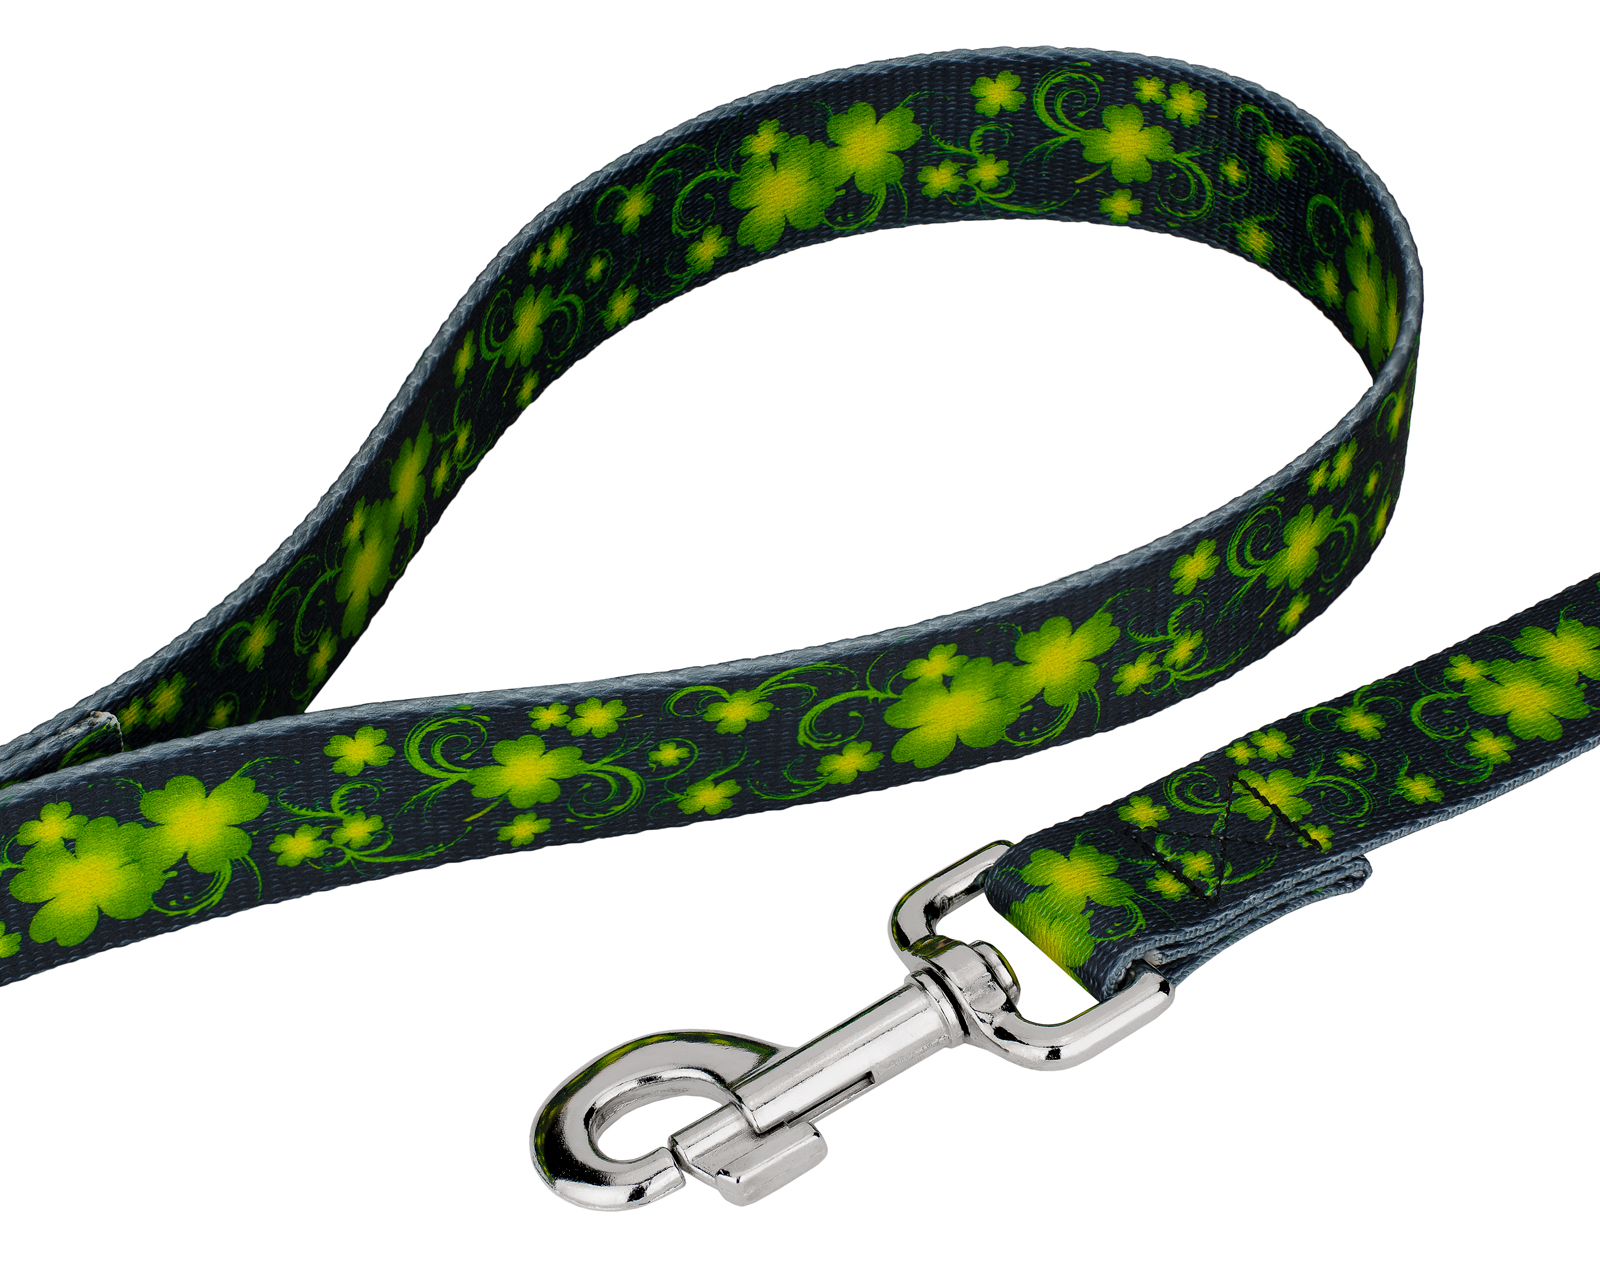 Country Brook Petz - Clovers In The Wind Dog Leash - Irish Pride Collection with 2 Lucky Designs (4 Foot, 1 inch Wide) - image 2 of 3